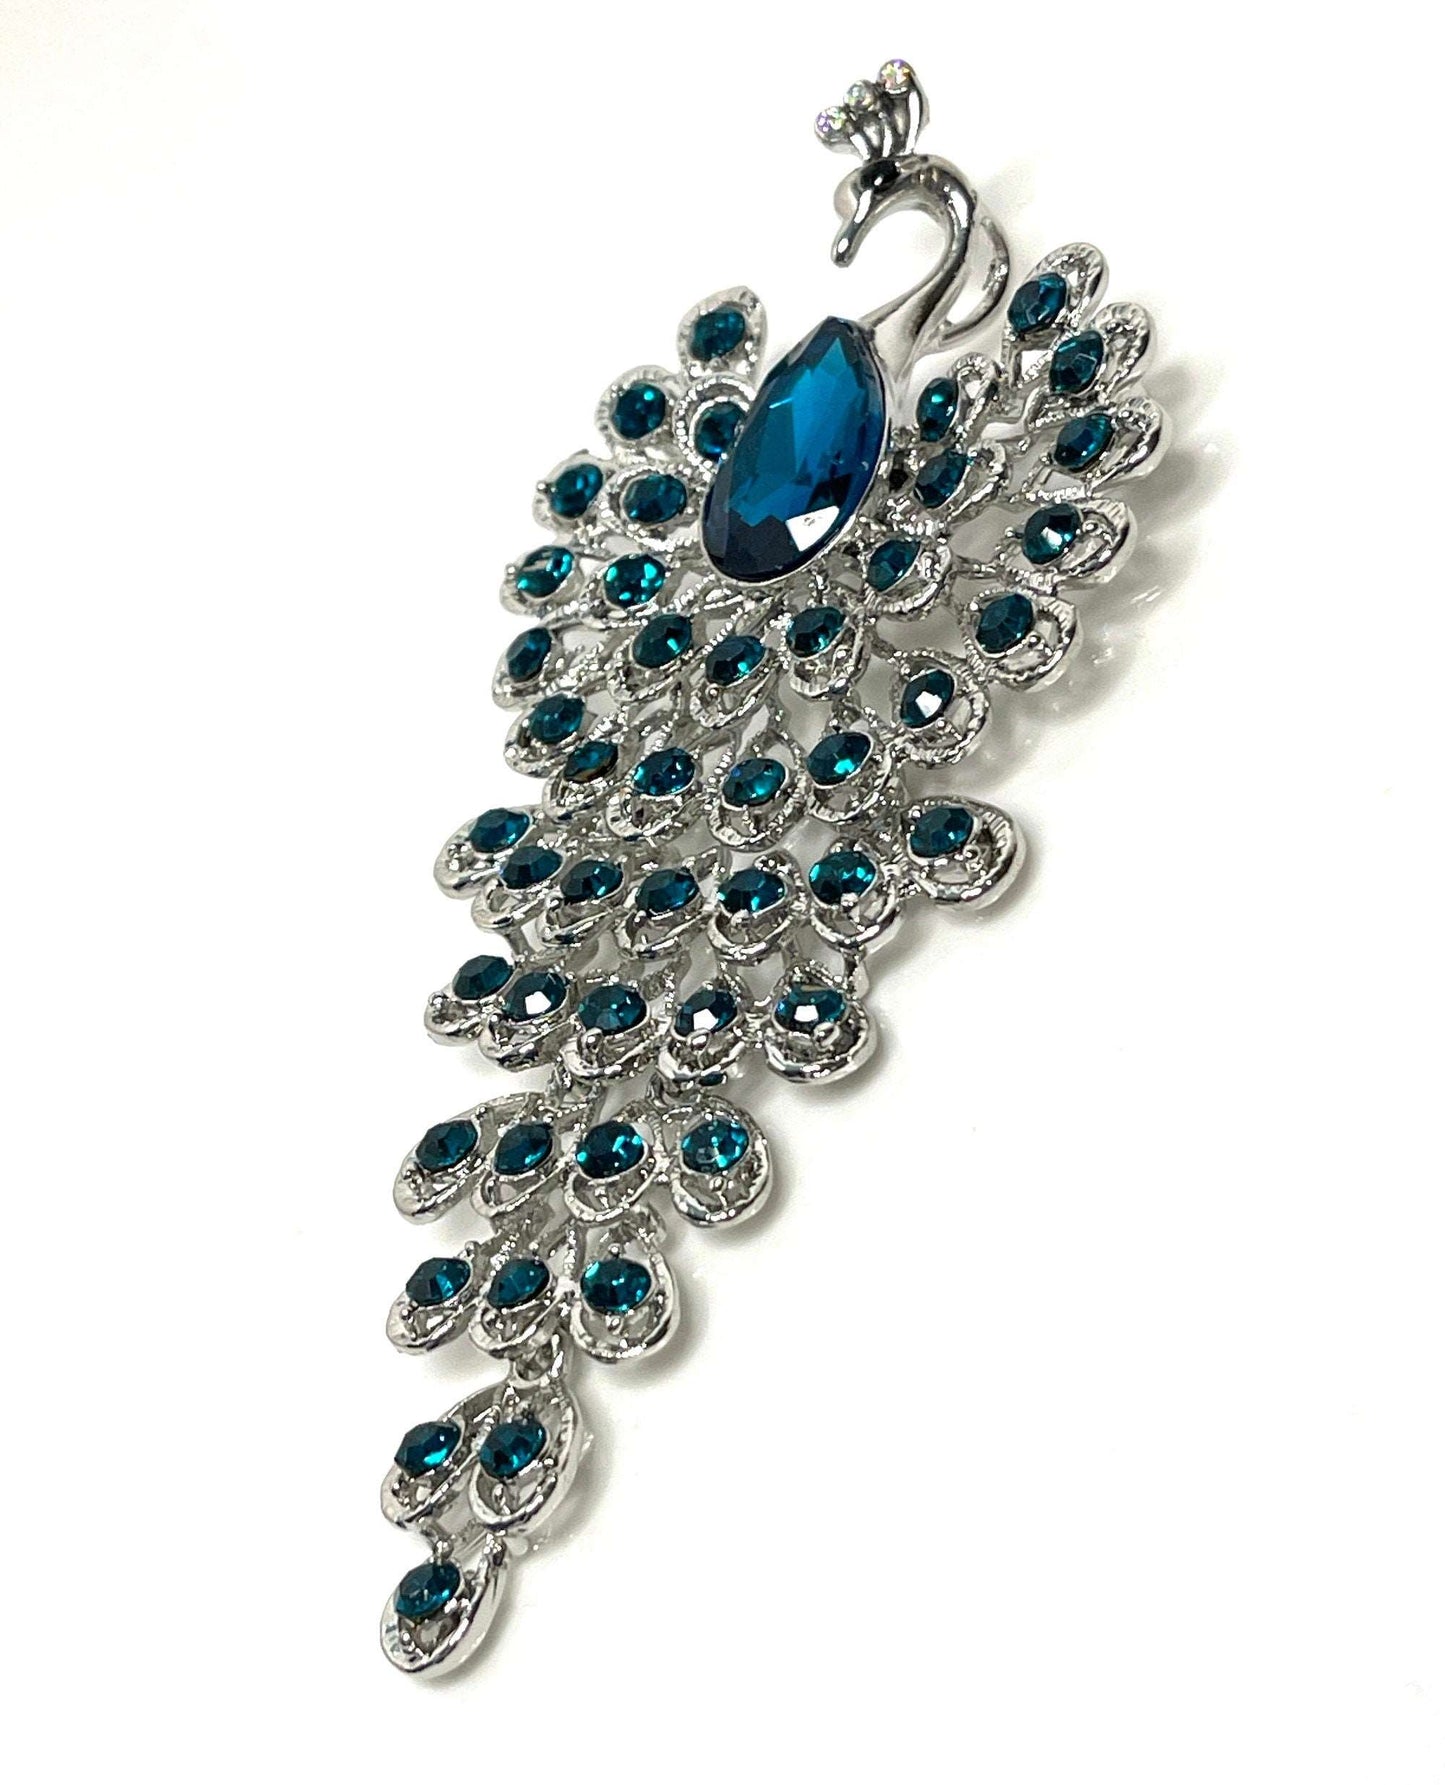 Long Crystal Peacock Brooch, Blue Statement Fashion Brooch, Tassel Peacock Pin, Luxury Peacock Pin, Brooches for Women